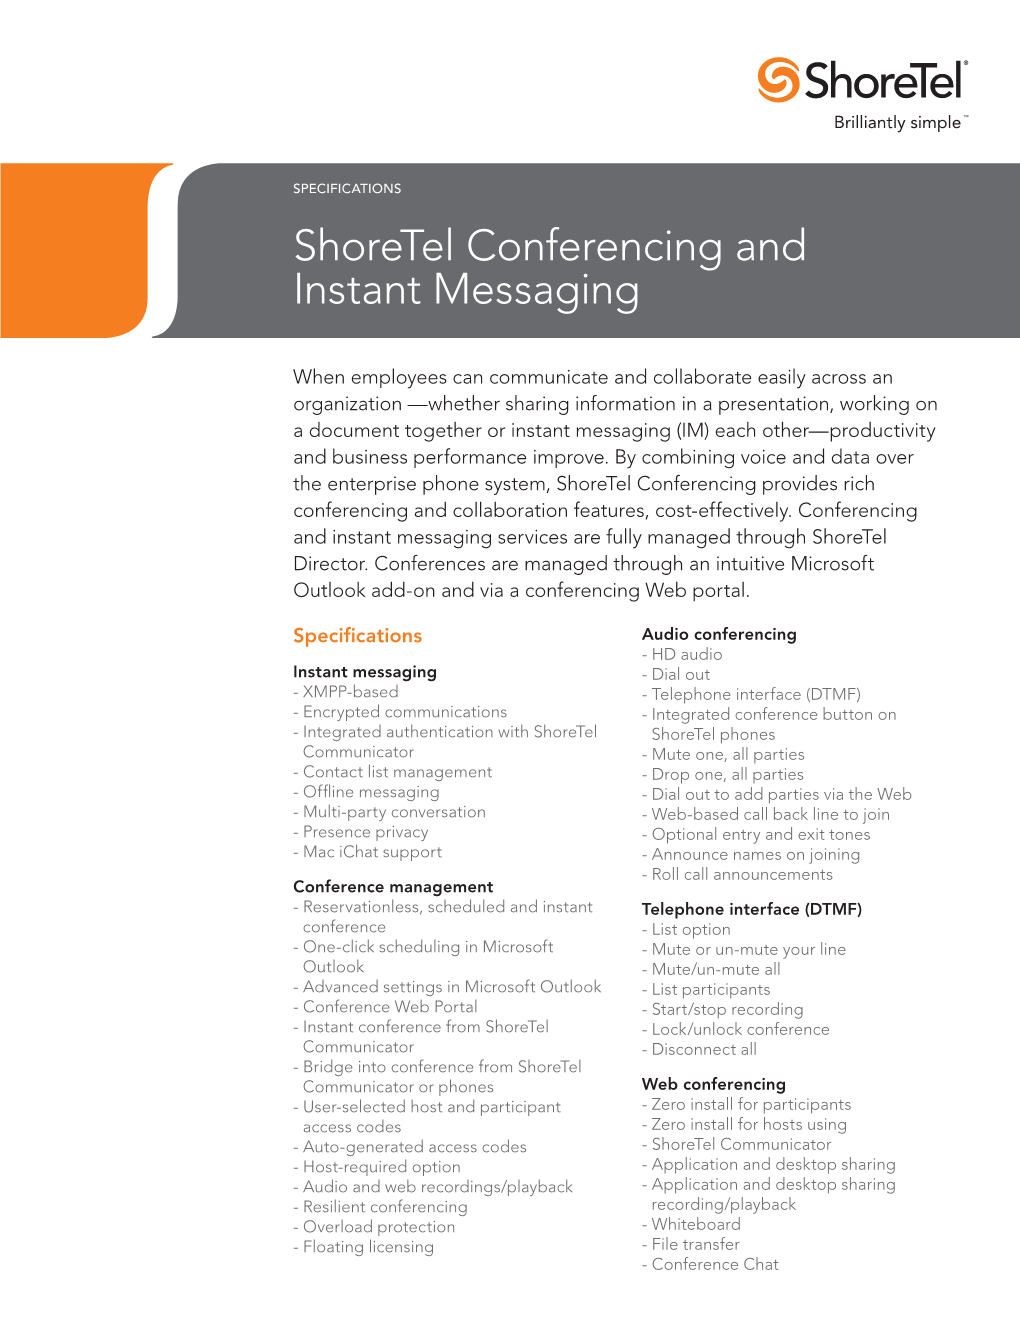 Shoretel Conferencing and Instant Messaging